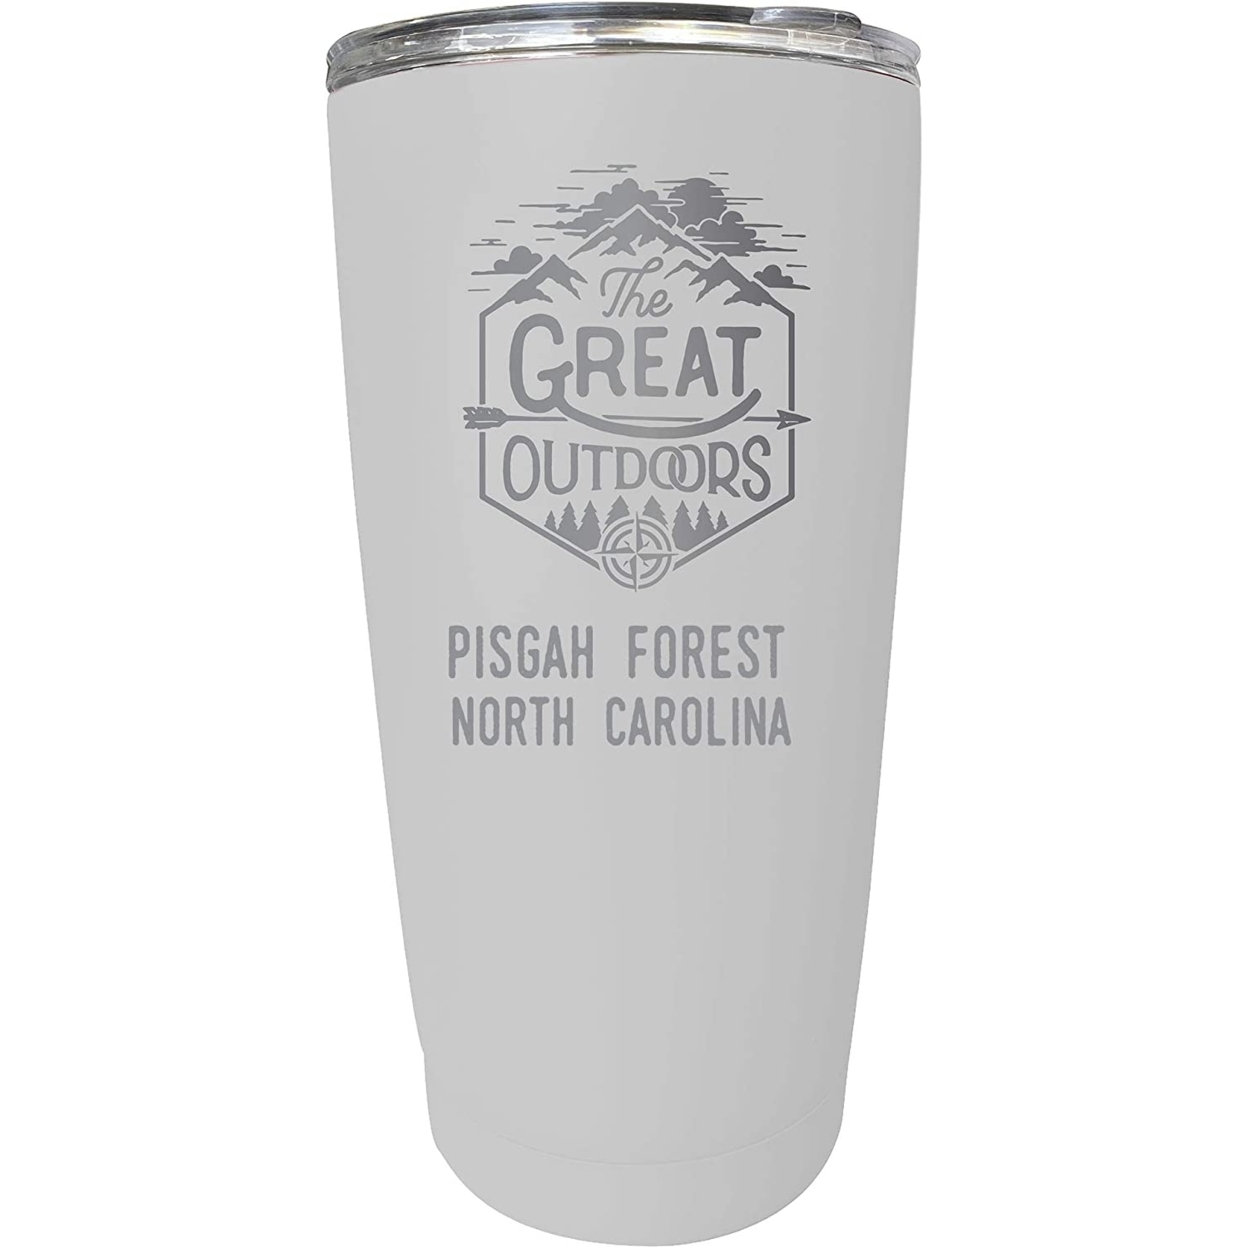 Pisgah Forest North Carolina Etched 16 Oz Stainless Steel Insulated Tumbler Outdoor Adventure Design - Black